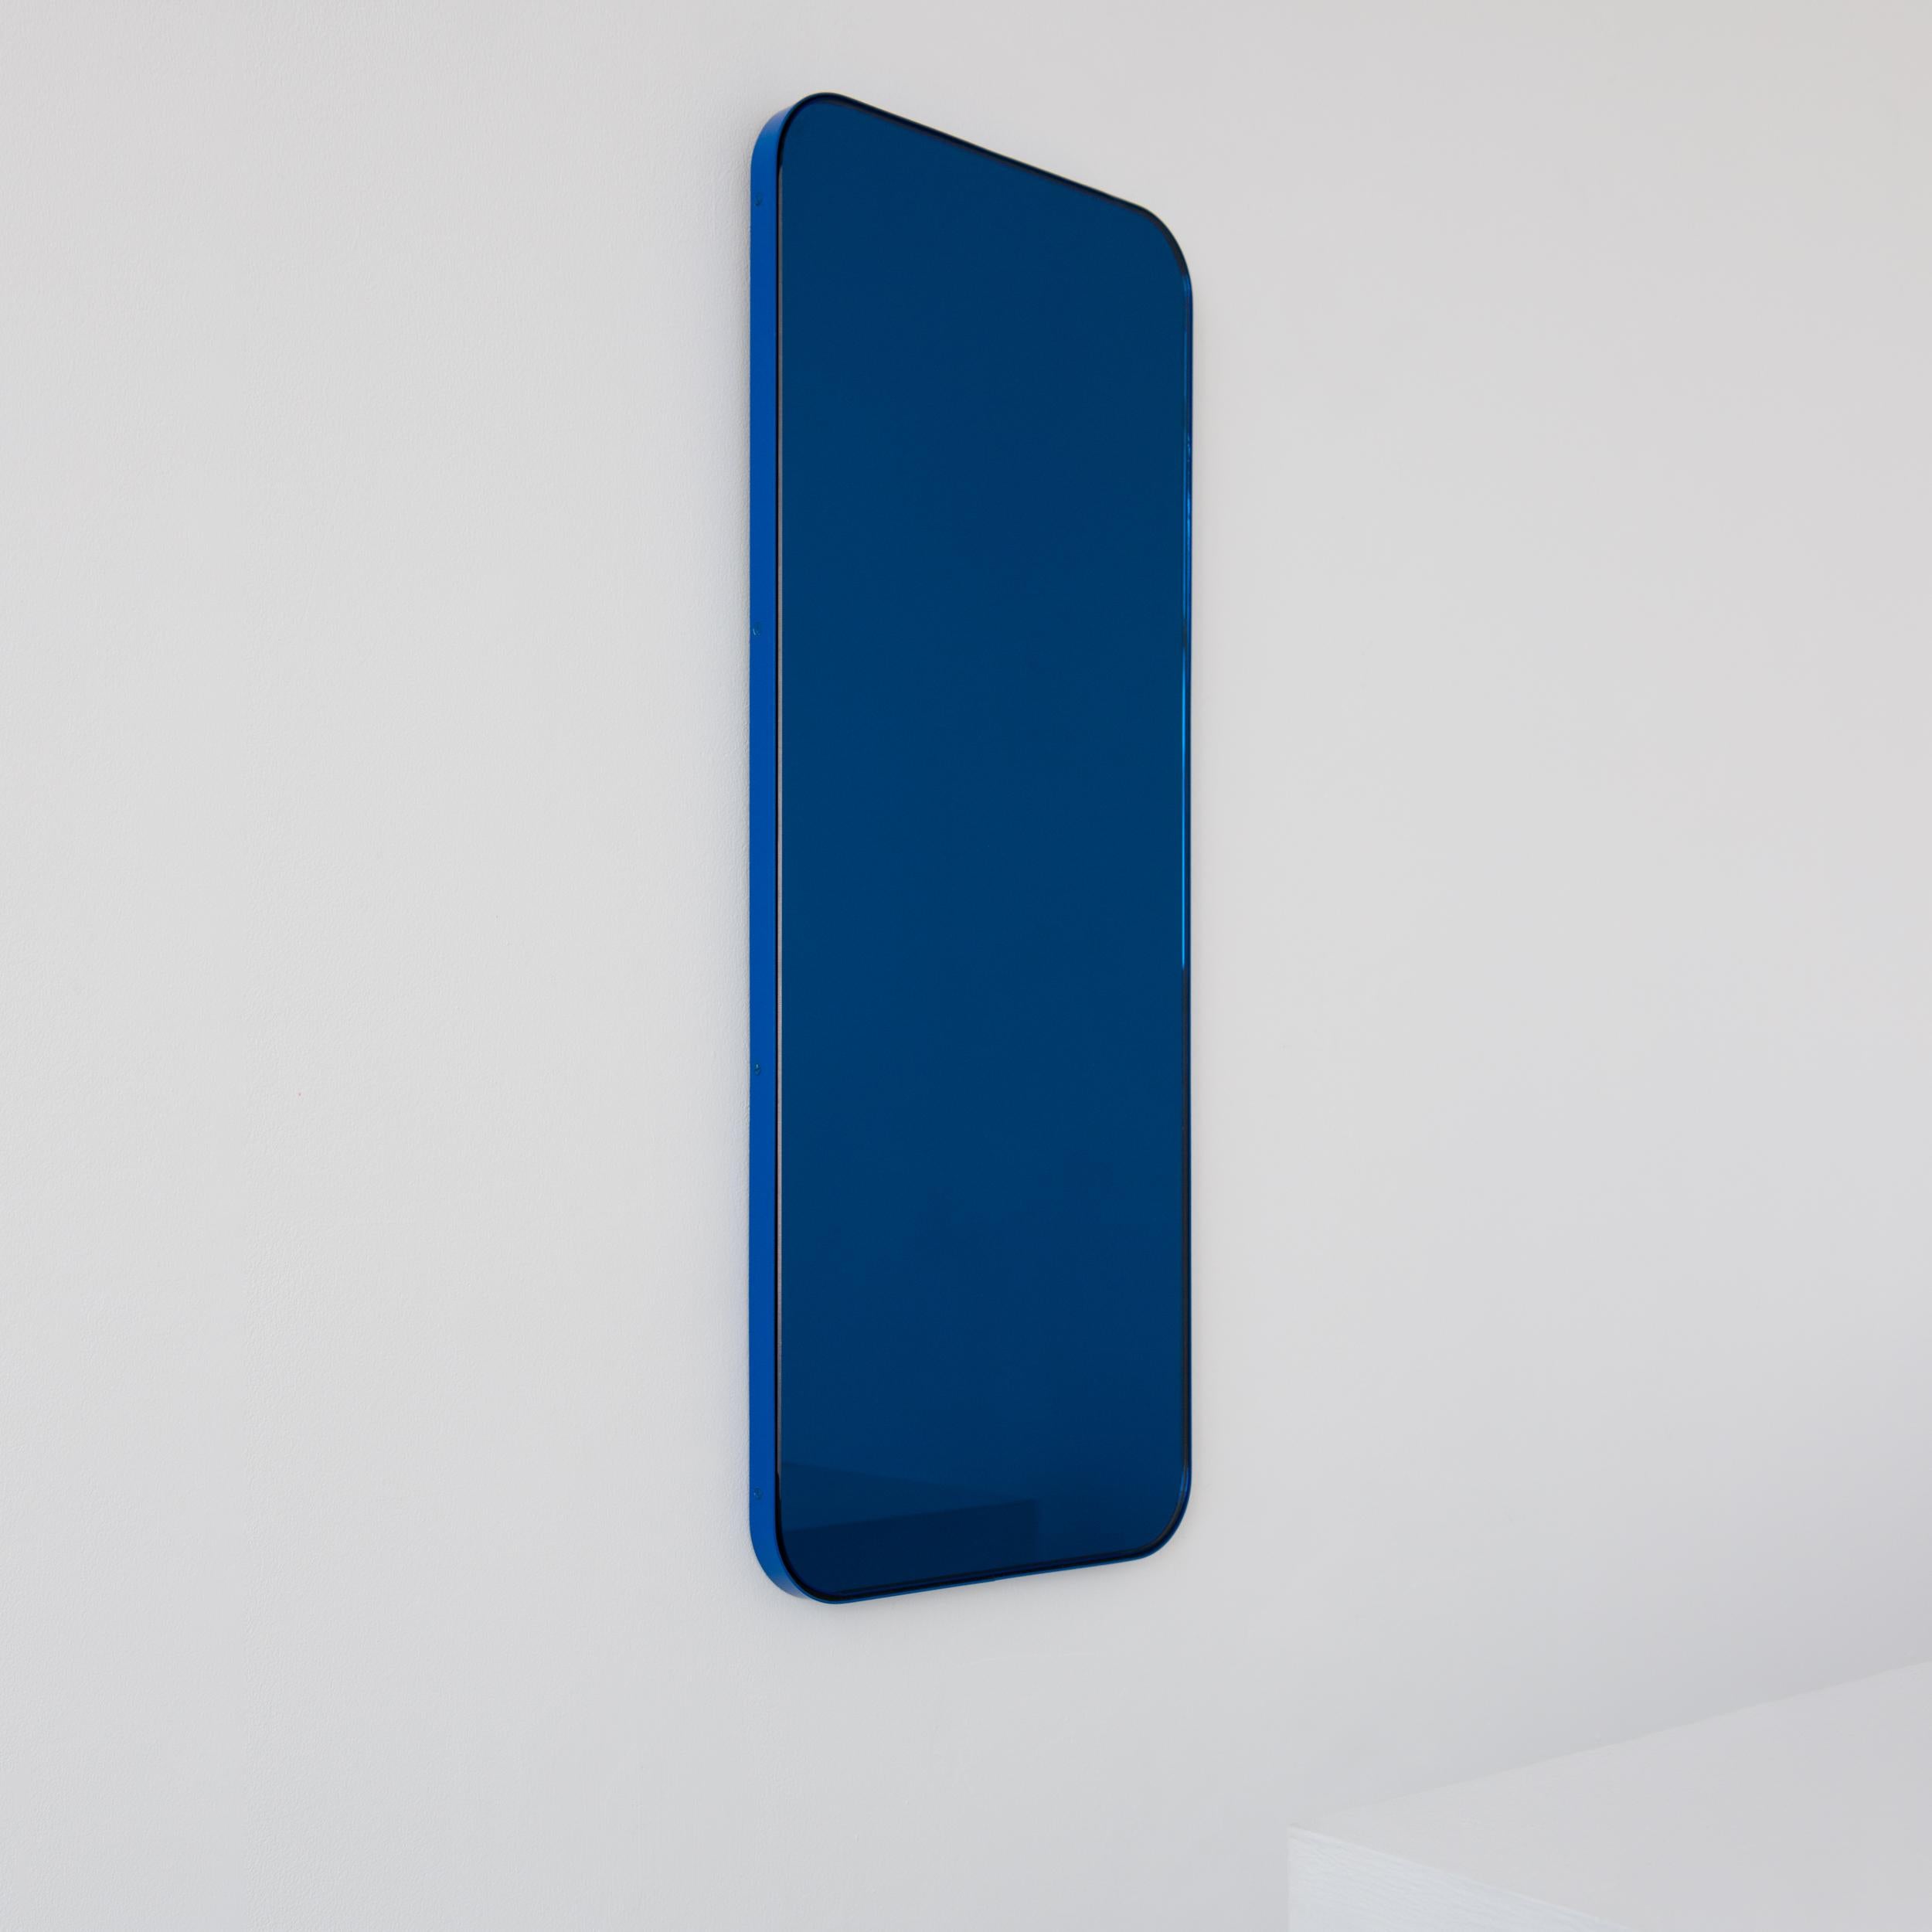 Quadris Rectangular Blue Tinted Mirror with a Blue Frame, Medium In New Condition For Sale In London, GB